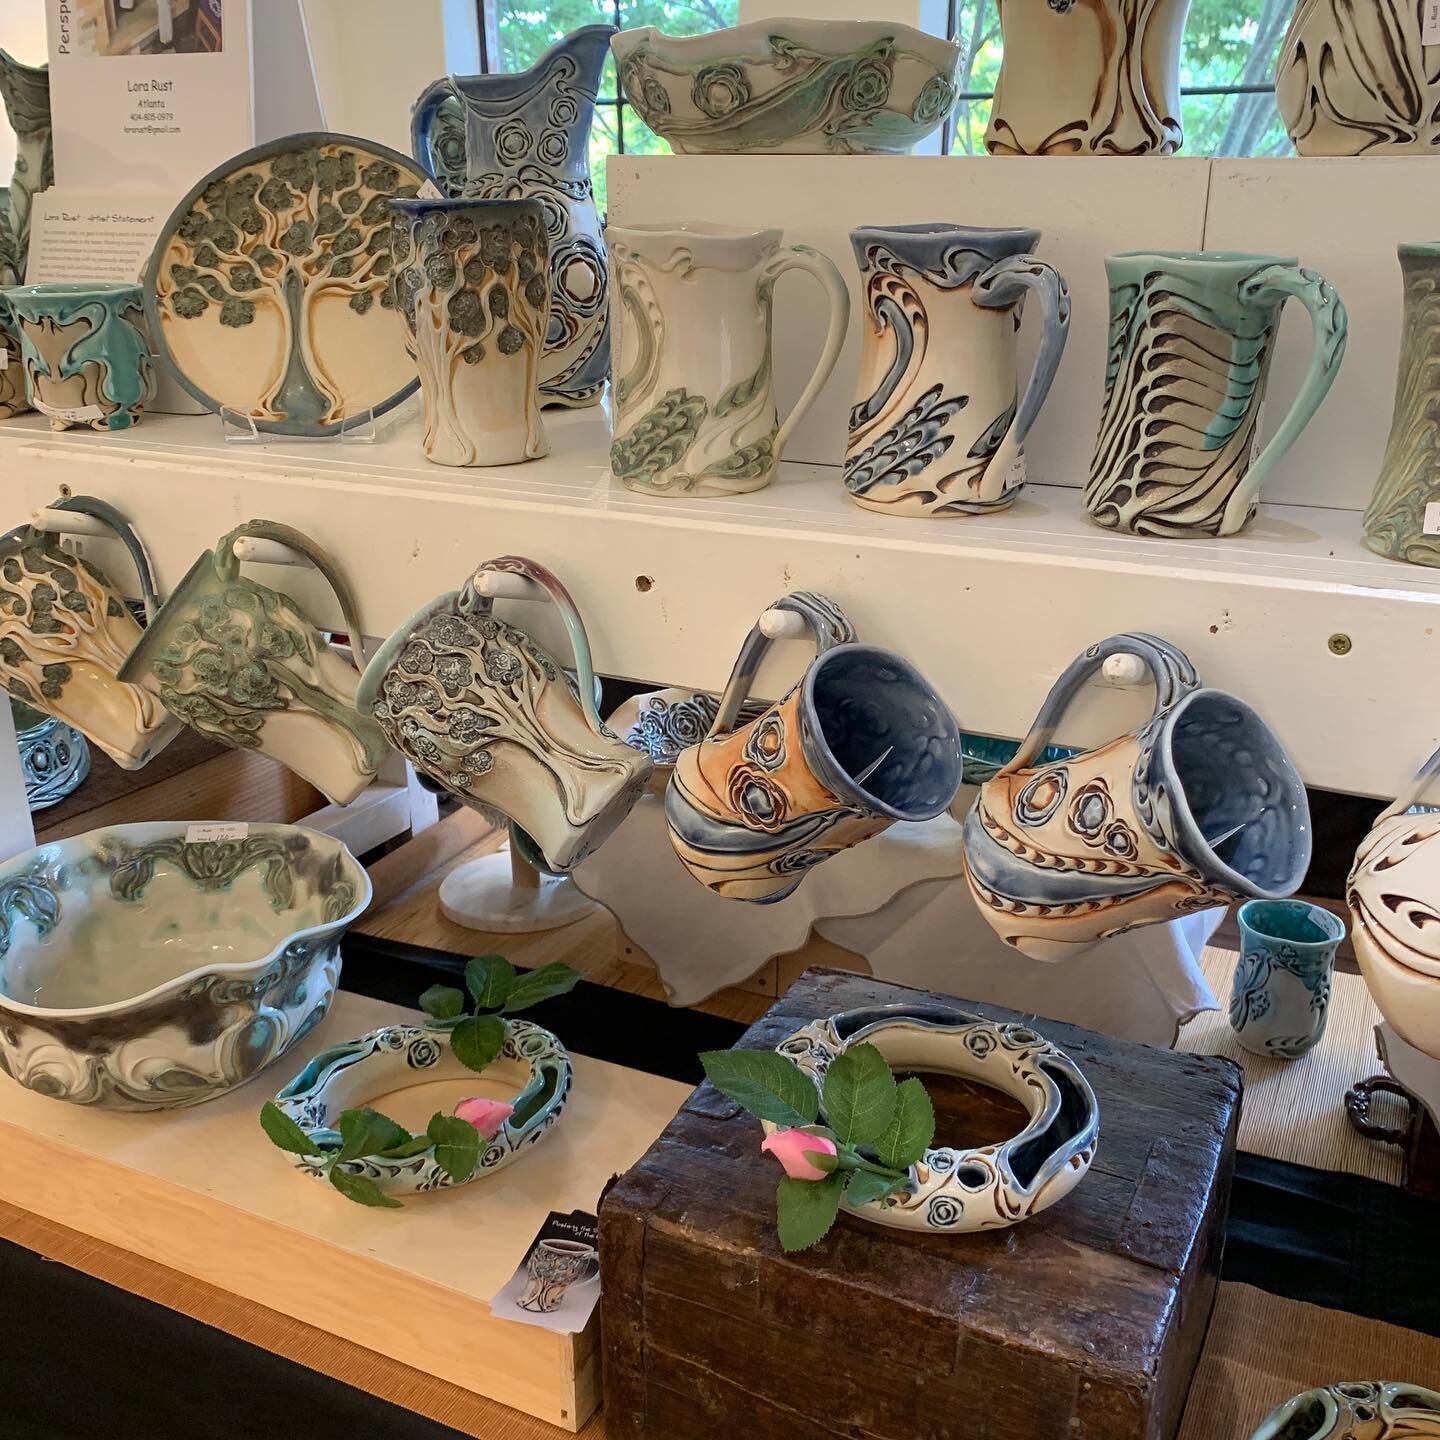 Perspectives: GA Pottery Invitational begins today through Sept. 12. Open daily 10a-5p @ocafgalleries Watkinsville, GA. Lovely new pieces just out of the kiln!